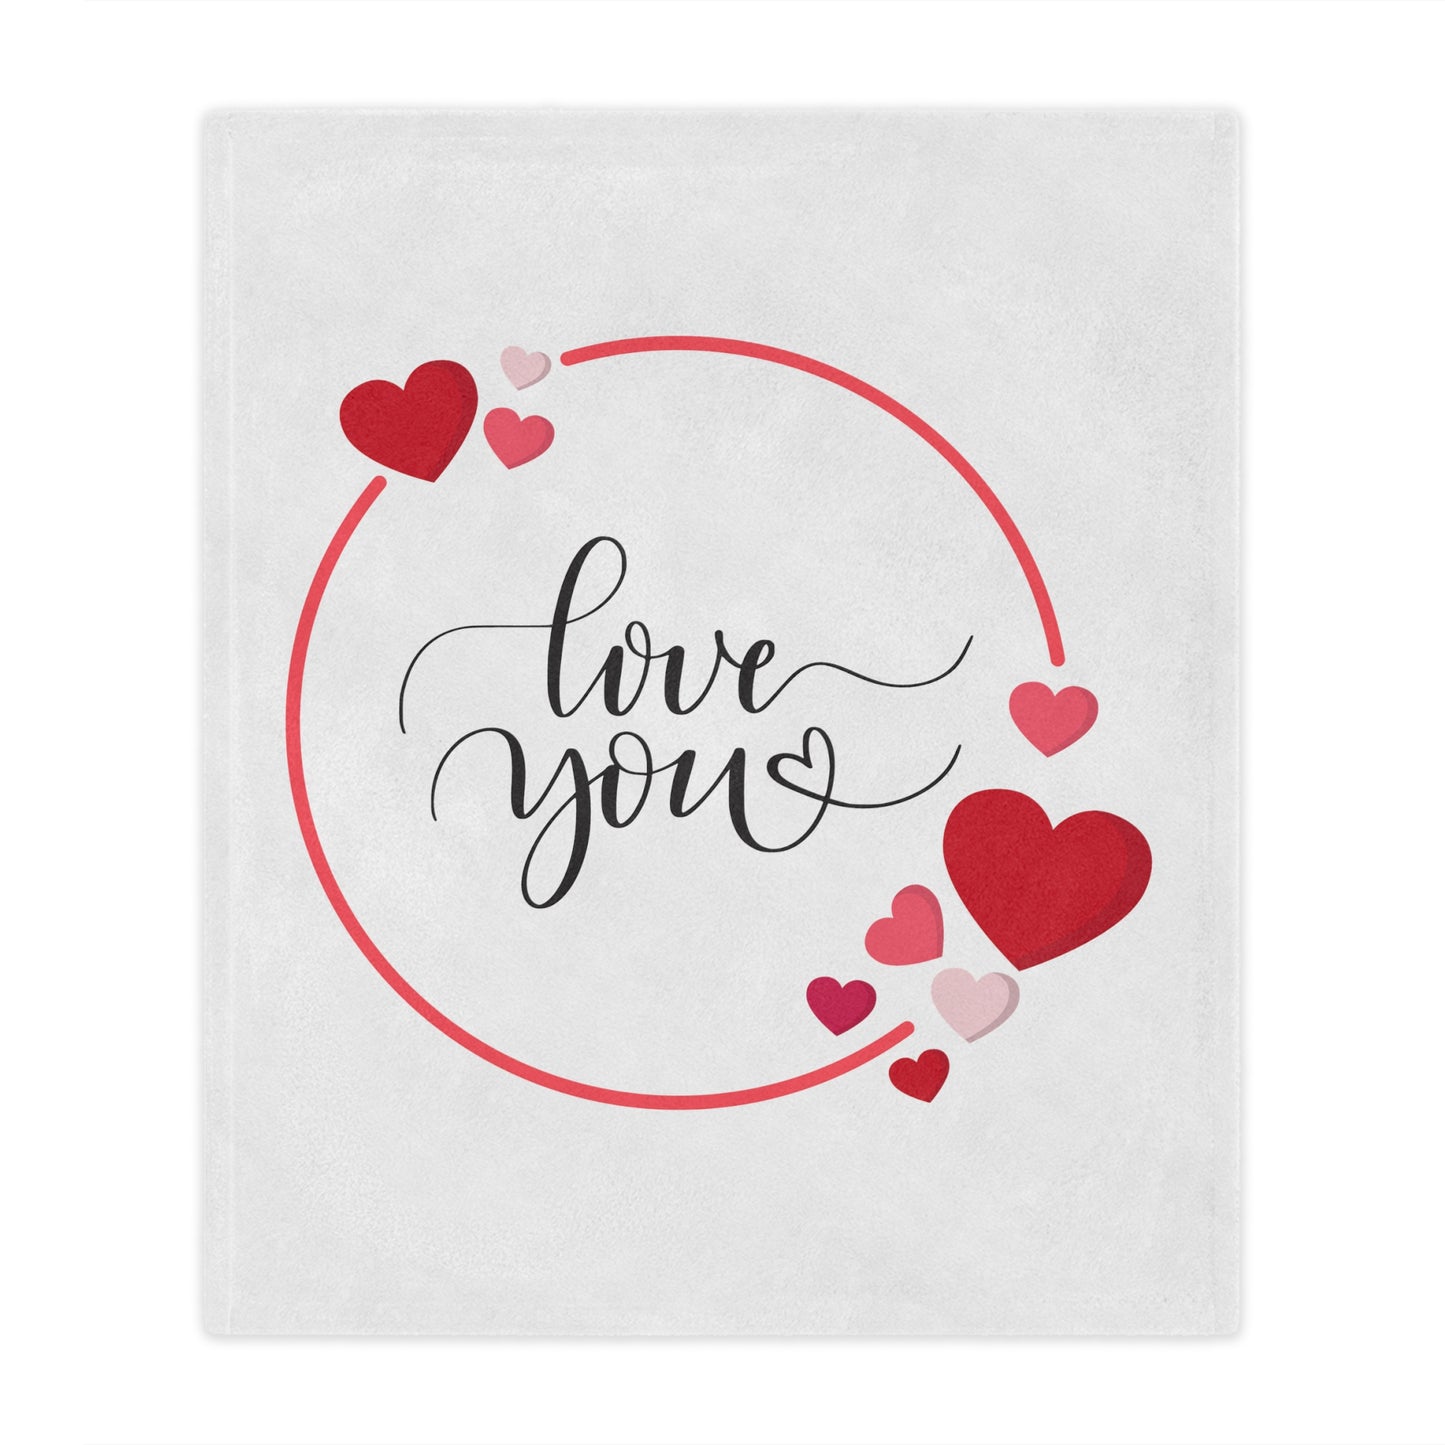 Love You with Flying Hearts Printed Velveteen Minky Blanket for Valentine